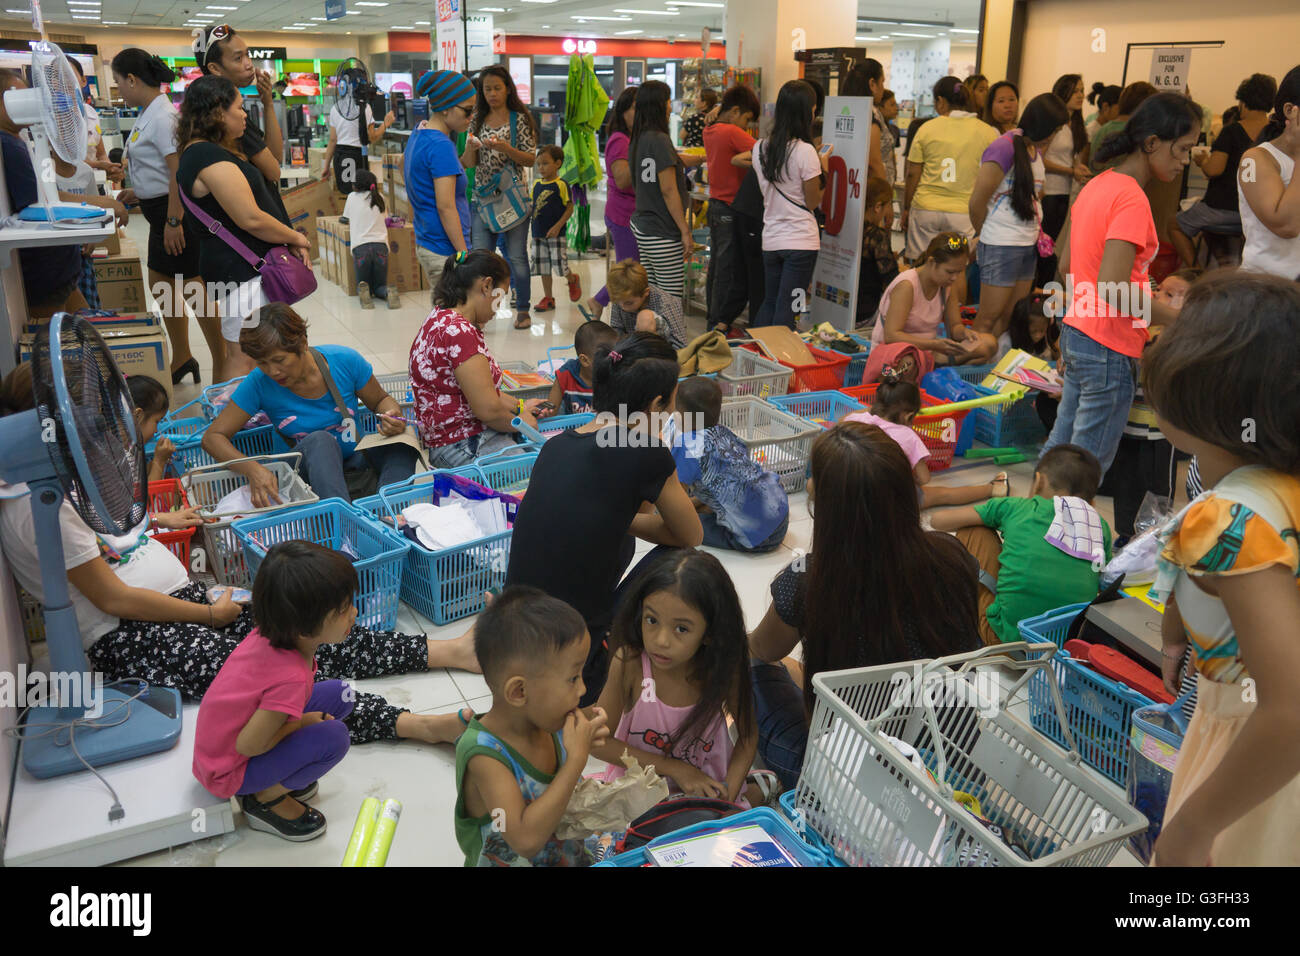 Ayala Mall, Cebu City, Philippines. 10th June, 2016.An estimated 25 Million Schoolchildren in the Philippines will return to school on Monday June 13th after their summer break.The weekend prior to the Monday saw parents and children shopping together frantically buying last minute supplies,taking advantage of the many sales in department stores. Credit:  imagegallery2/Alamy Live News Stock Photo